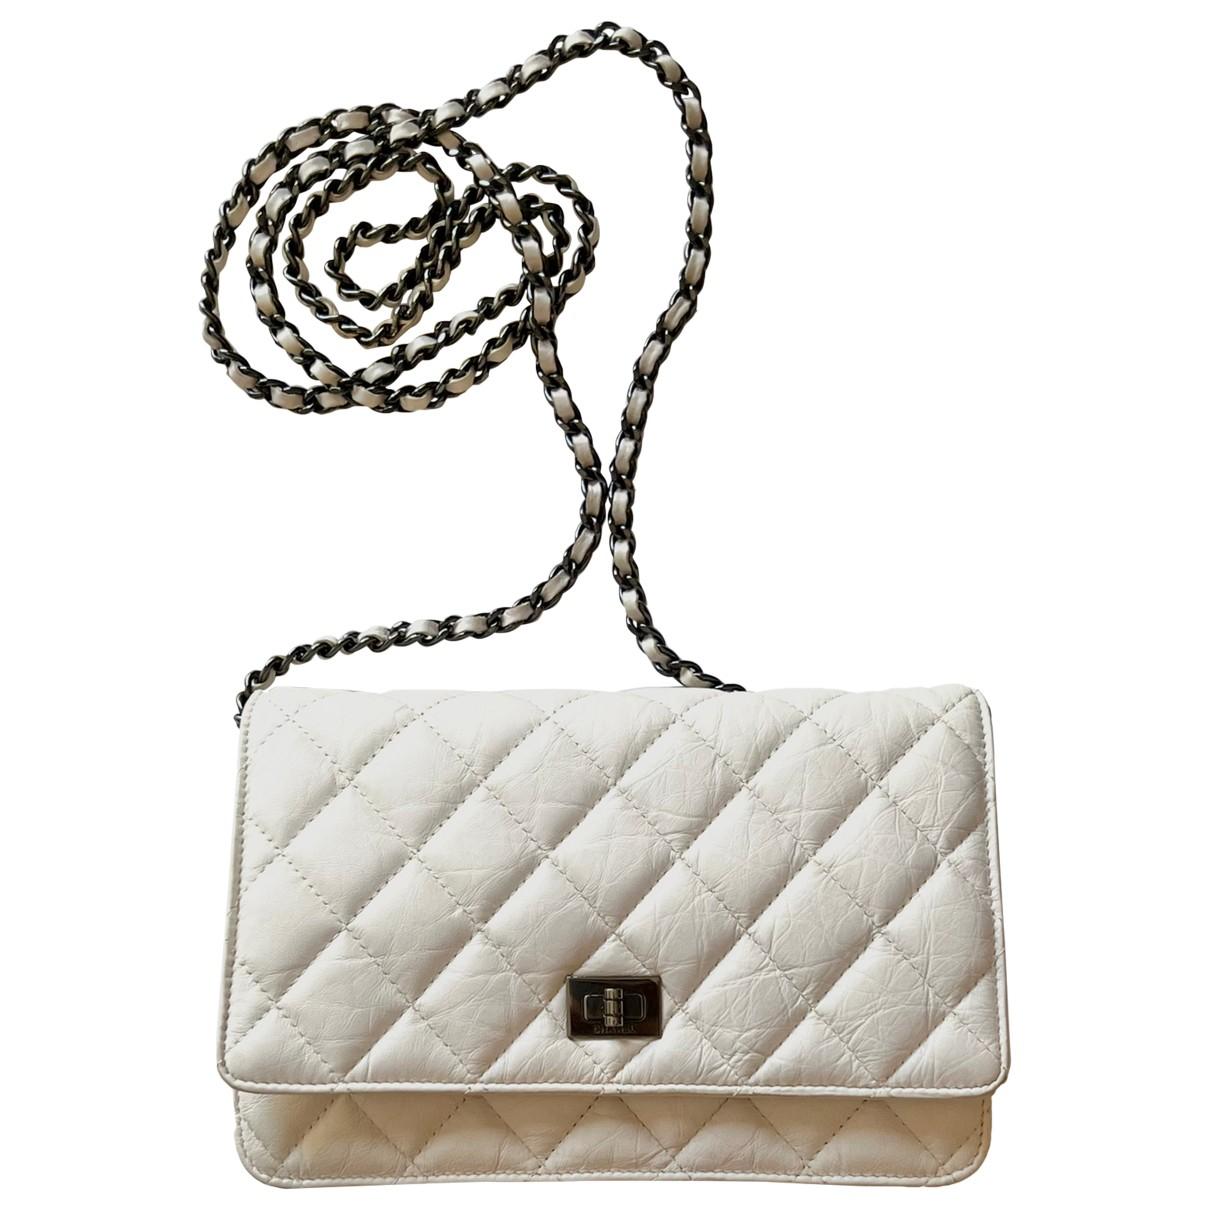 chanel mini flap with top handle bag